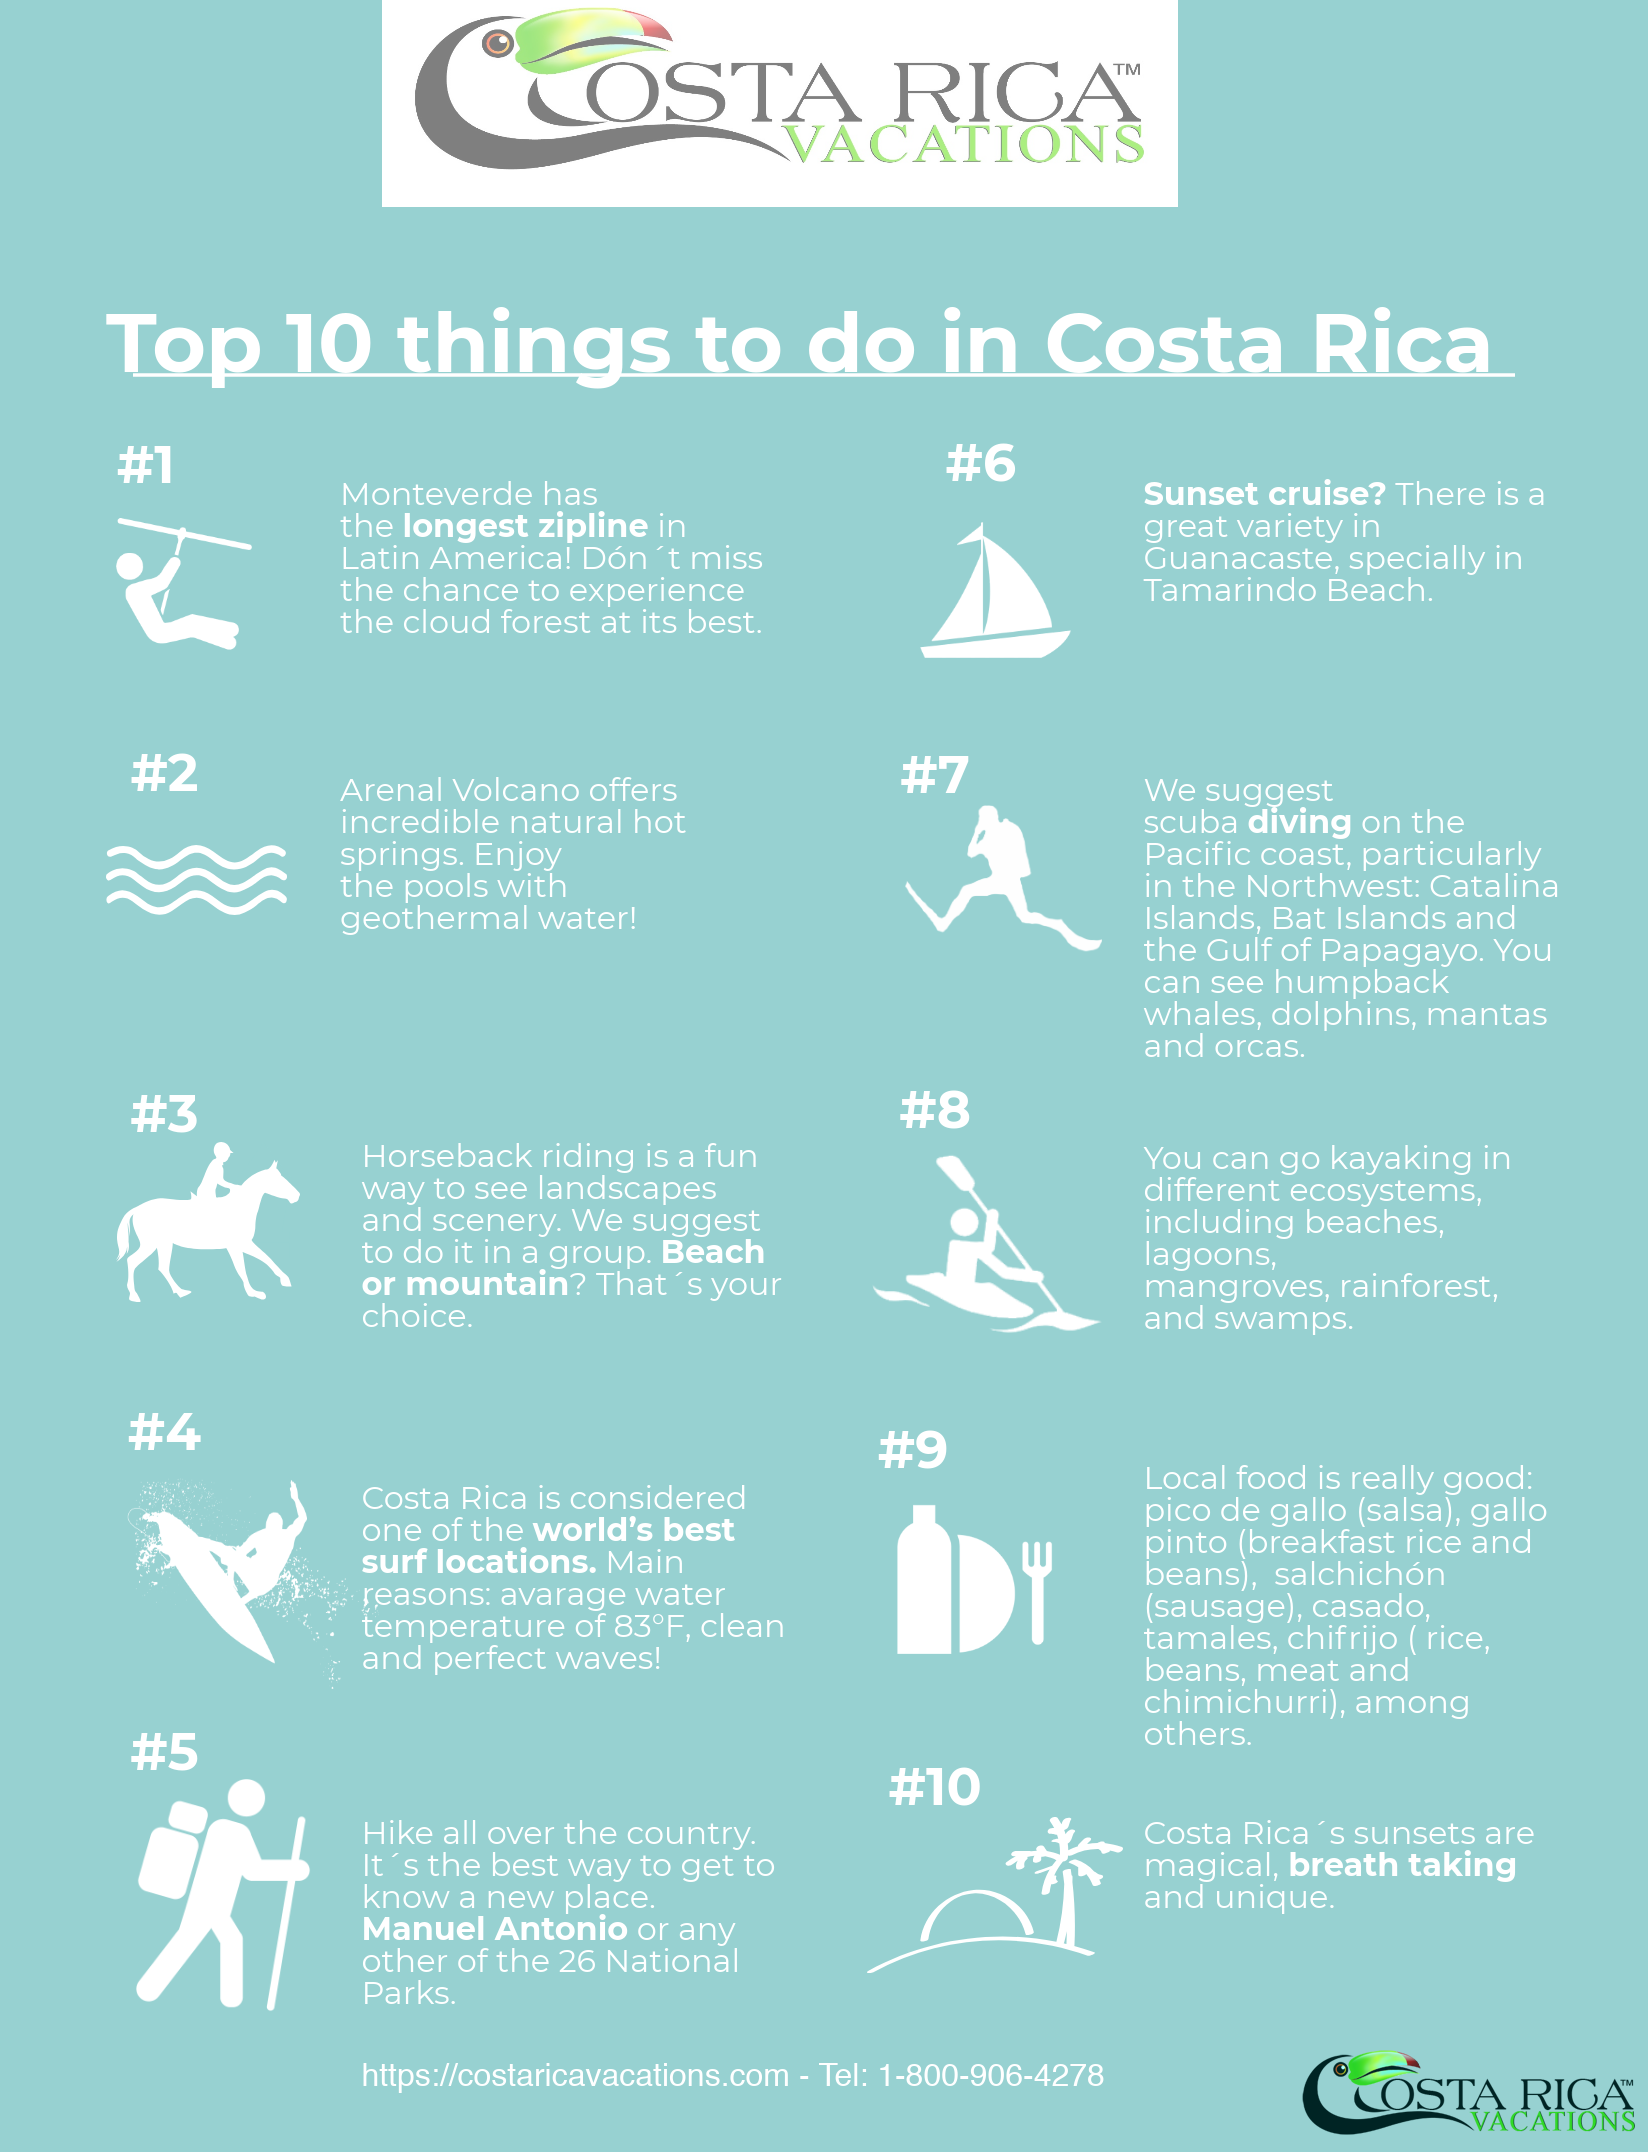 Top 10 things to do in Costa Rica